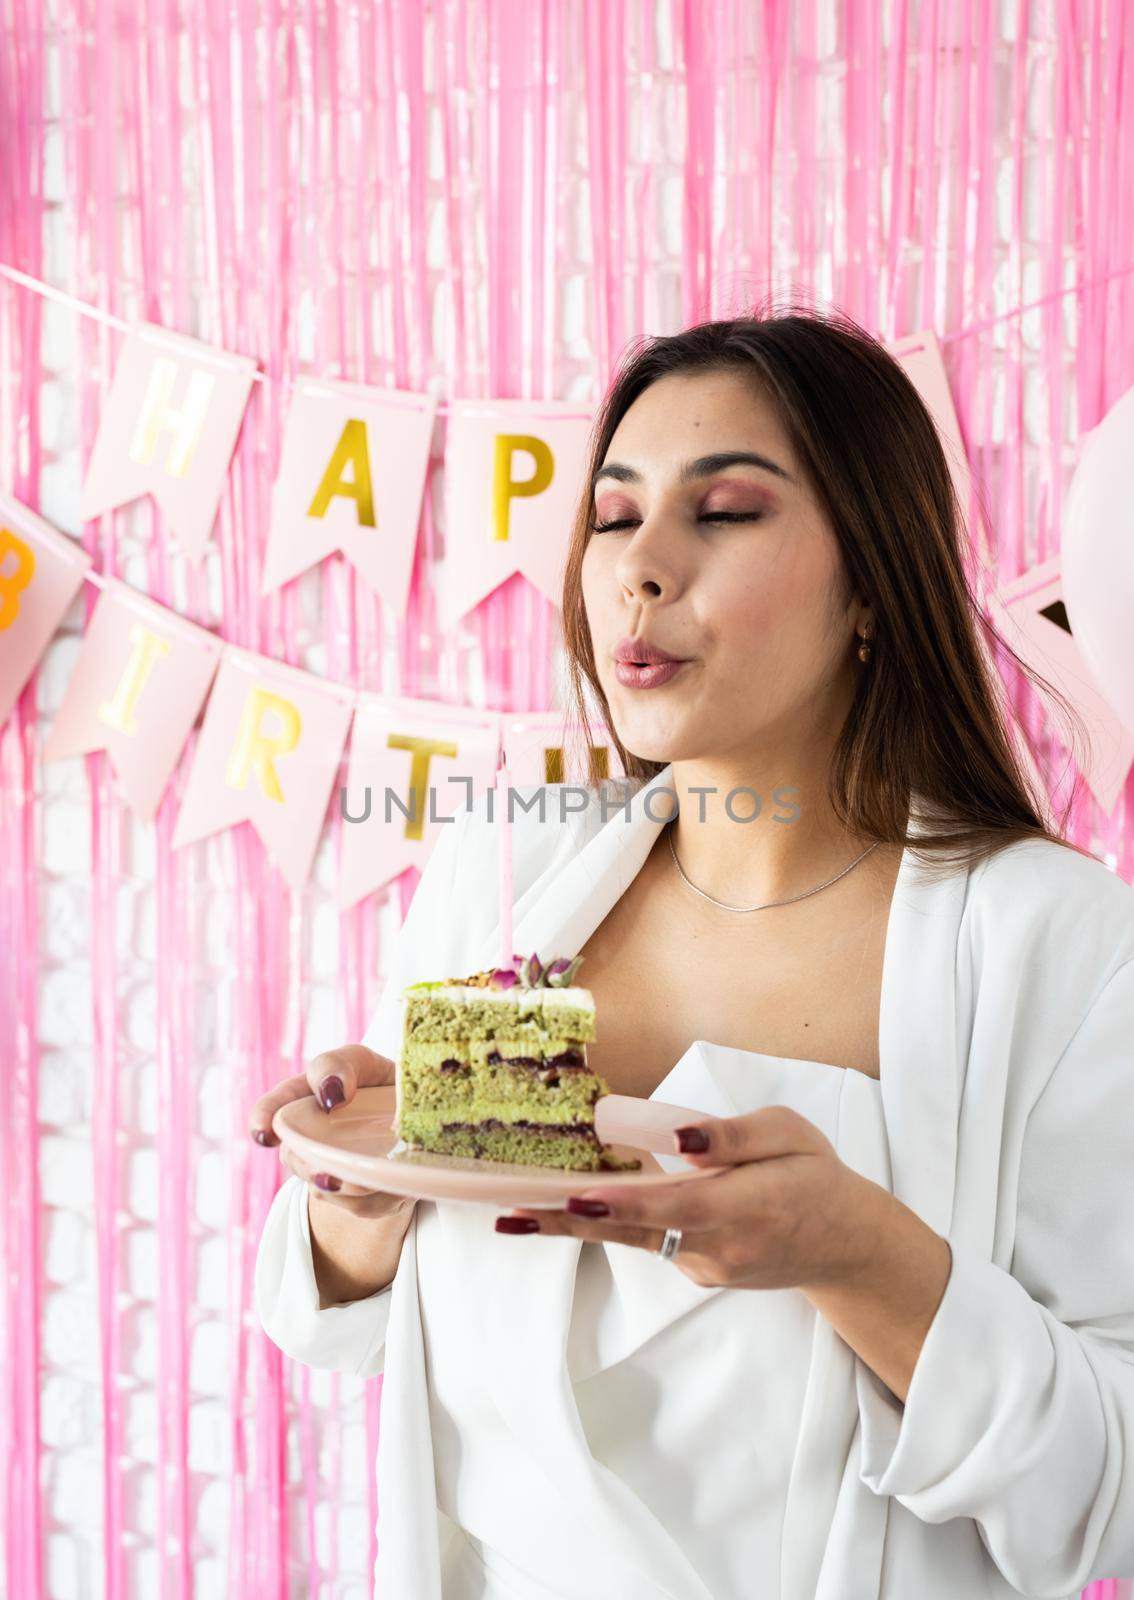 Beautiful woman celebrating birthday party holding a piece of cake making wish by Desperada